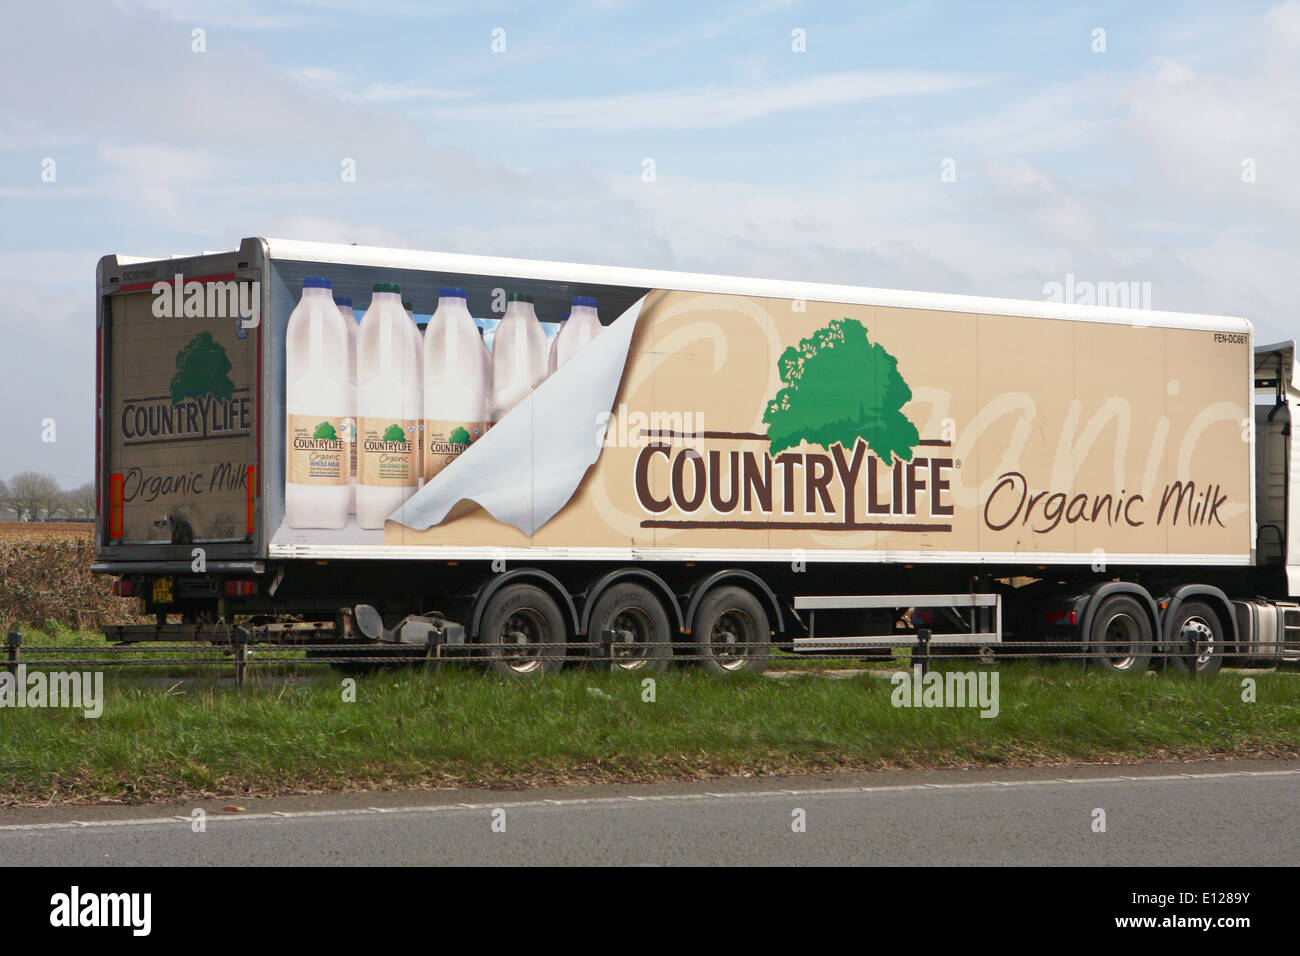 A Country Life truck traveling along the A417 dual carriageway in The Cotswolds, England Stock Photo